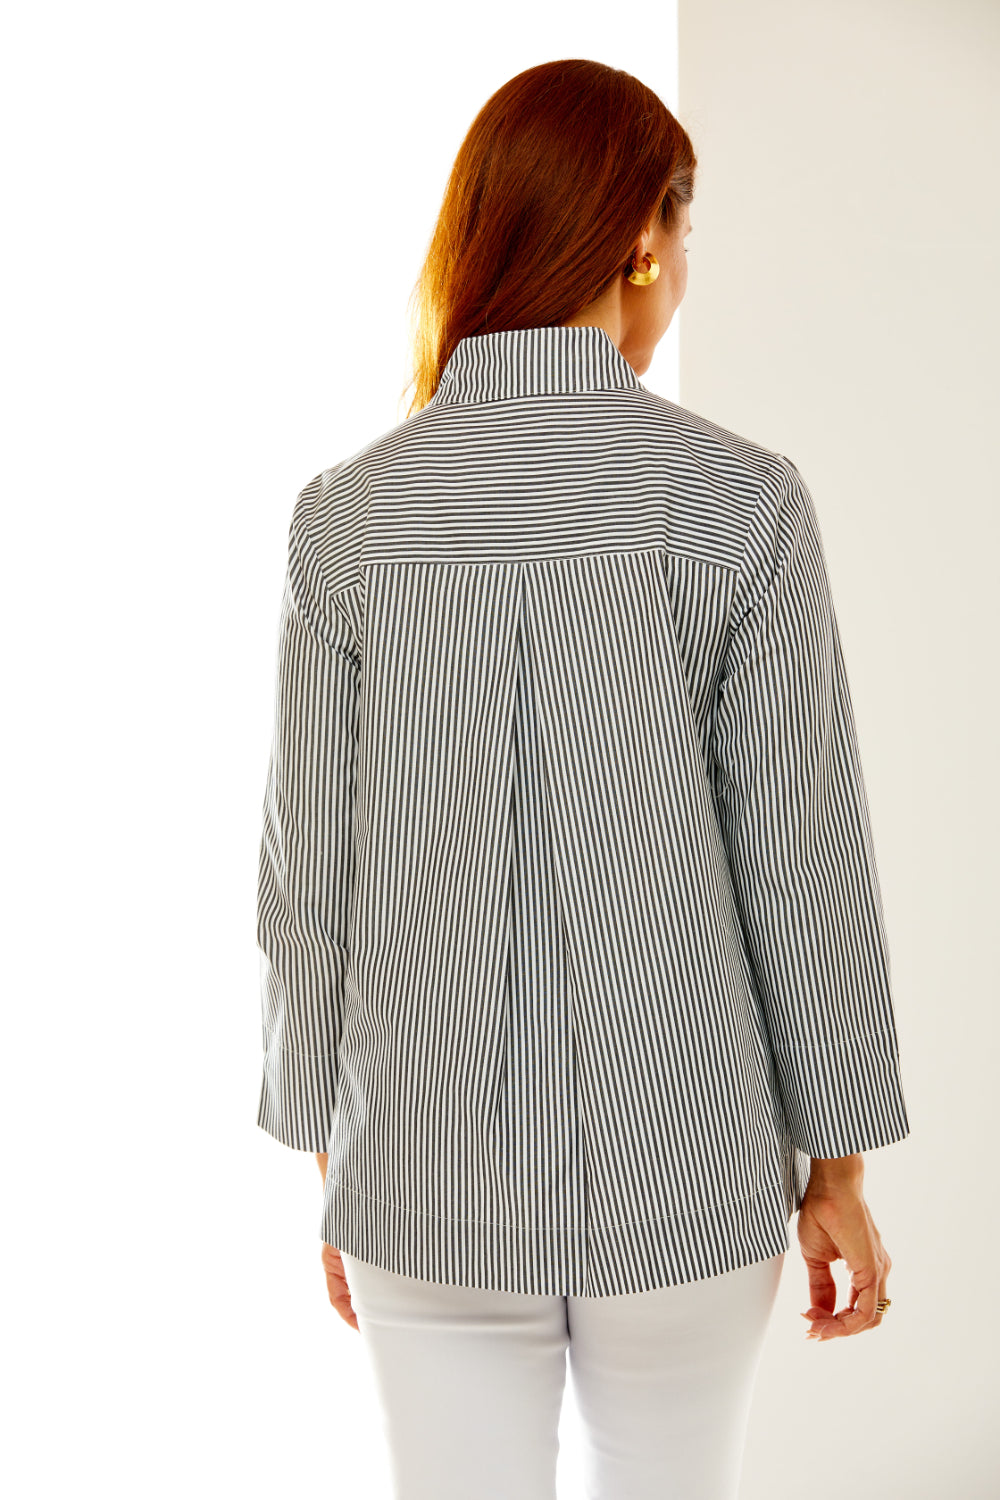 Woman in black and white stripe shirt